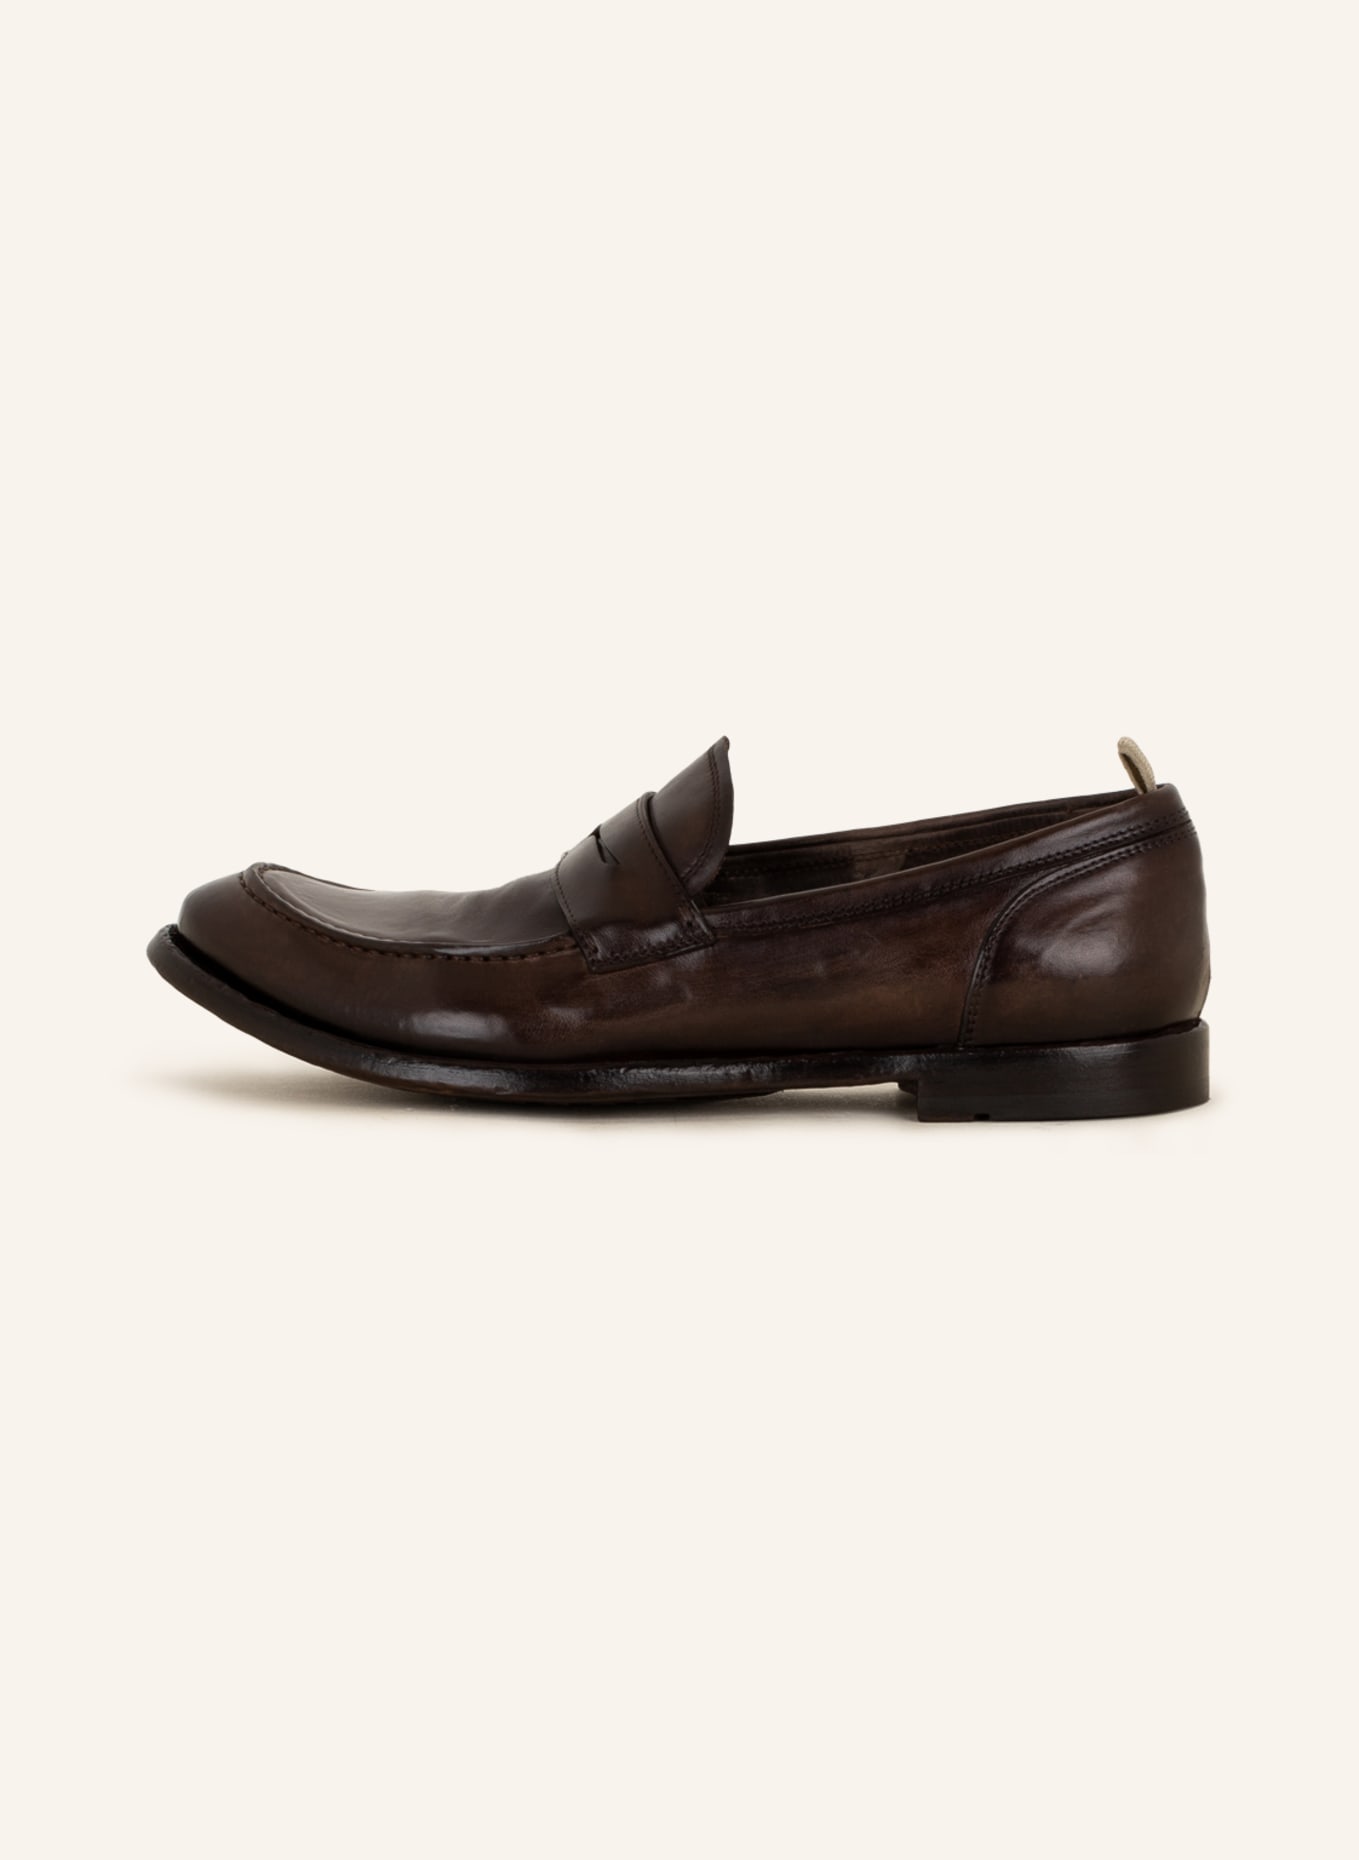 OFFICINE CREATIVE Penny loafers ANATOMIA, Color: DARK BROWN (Image 4)